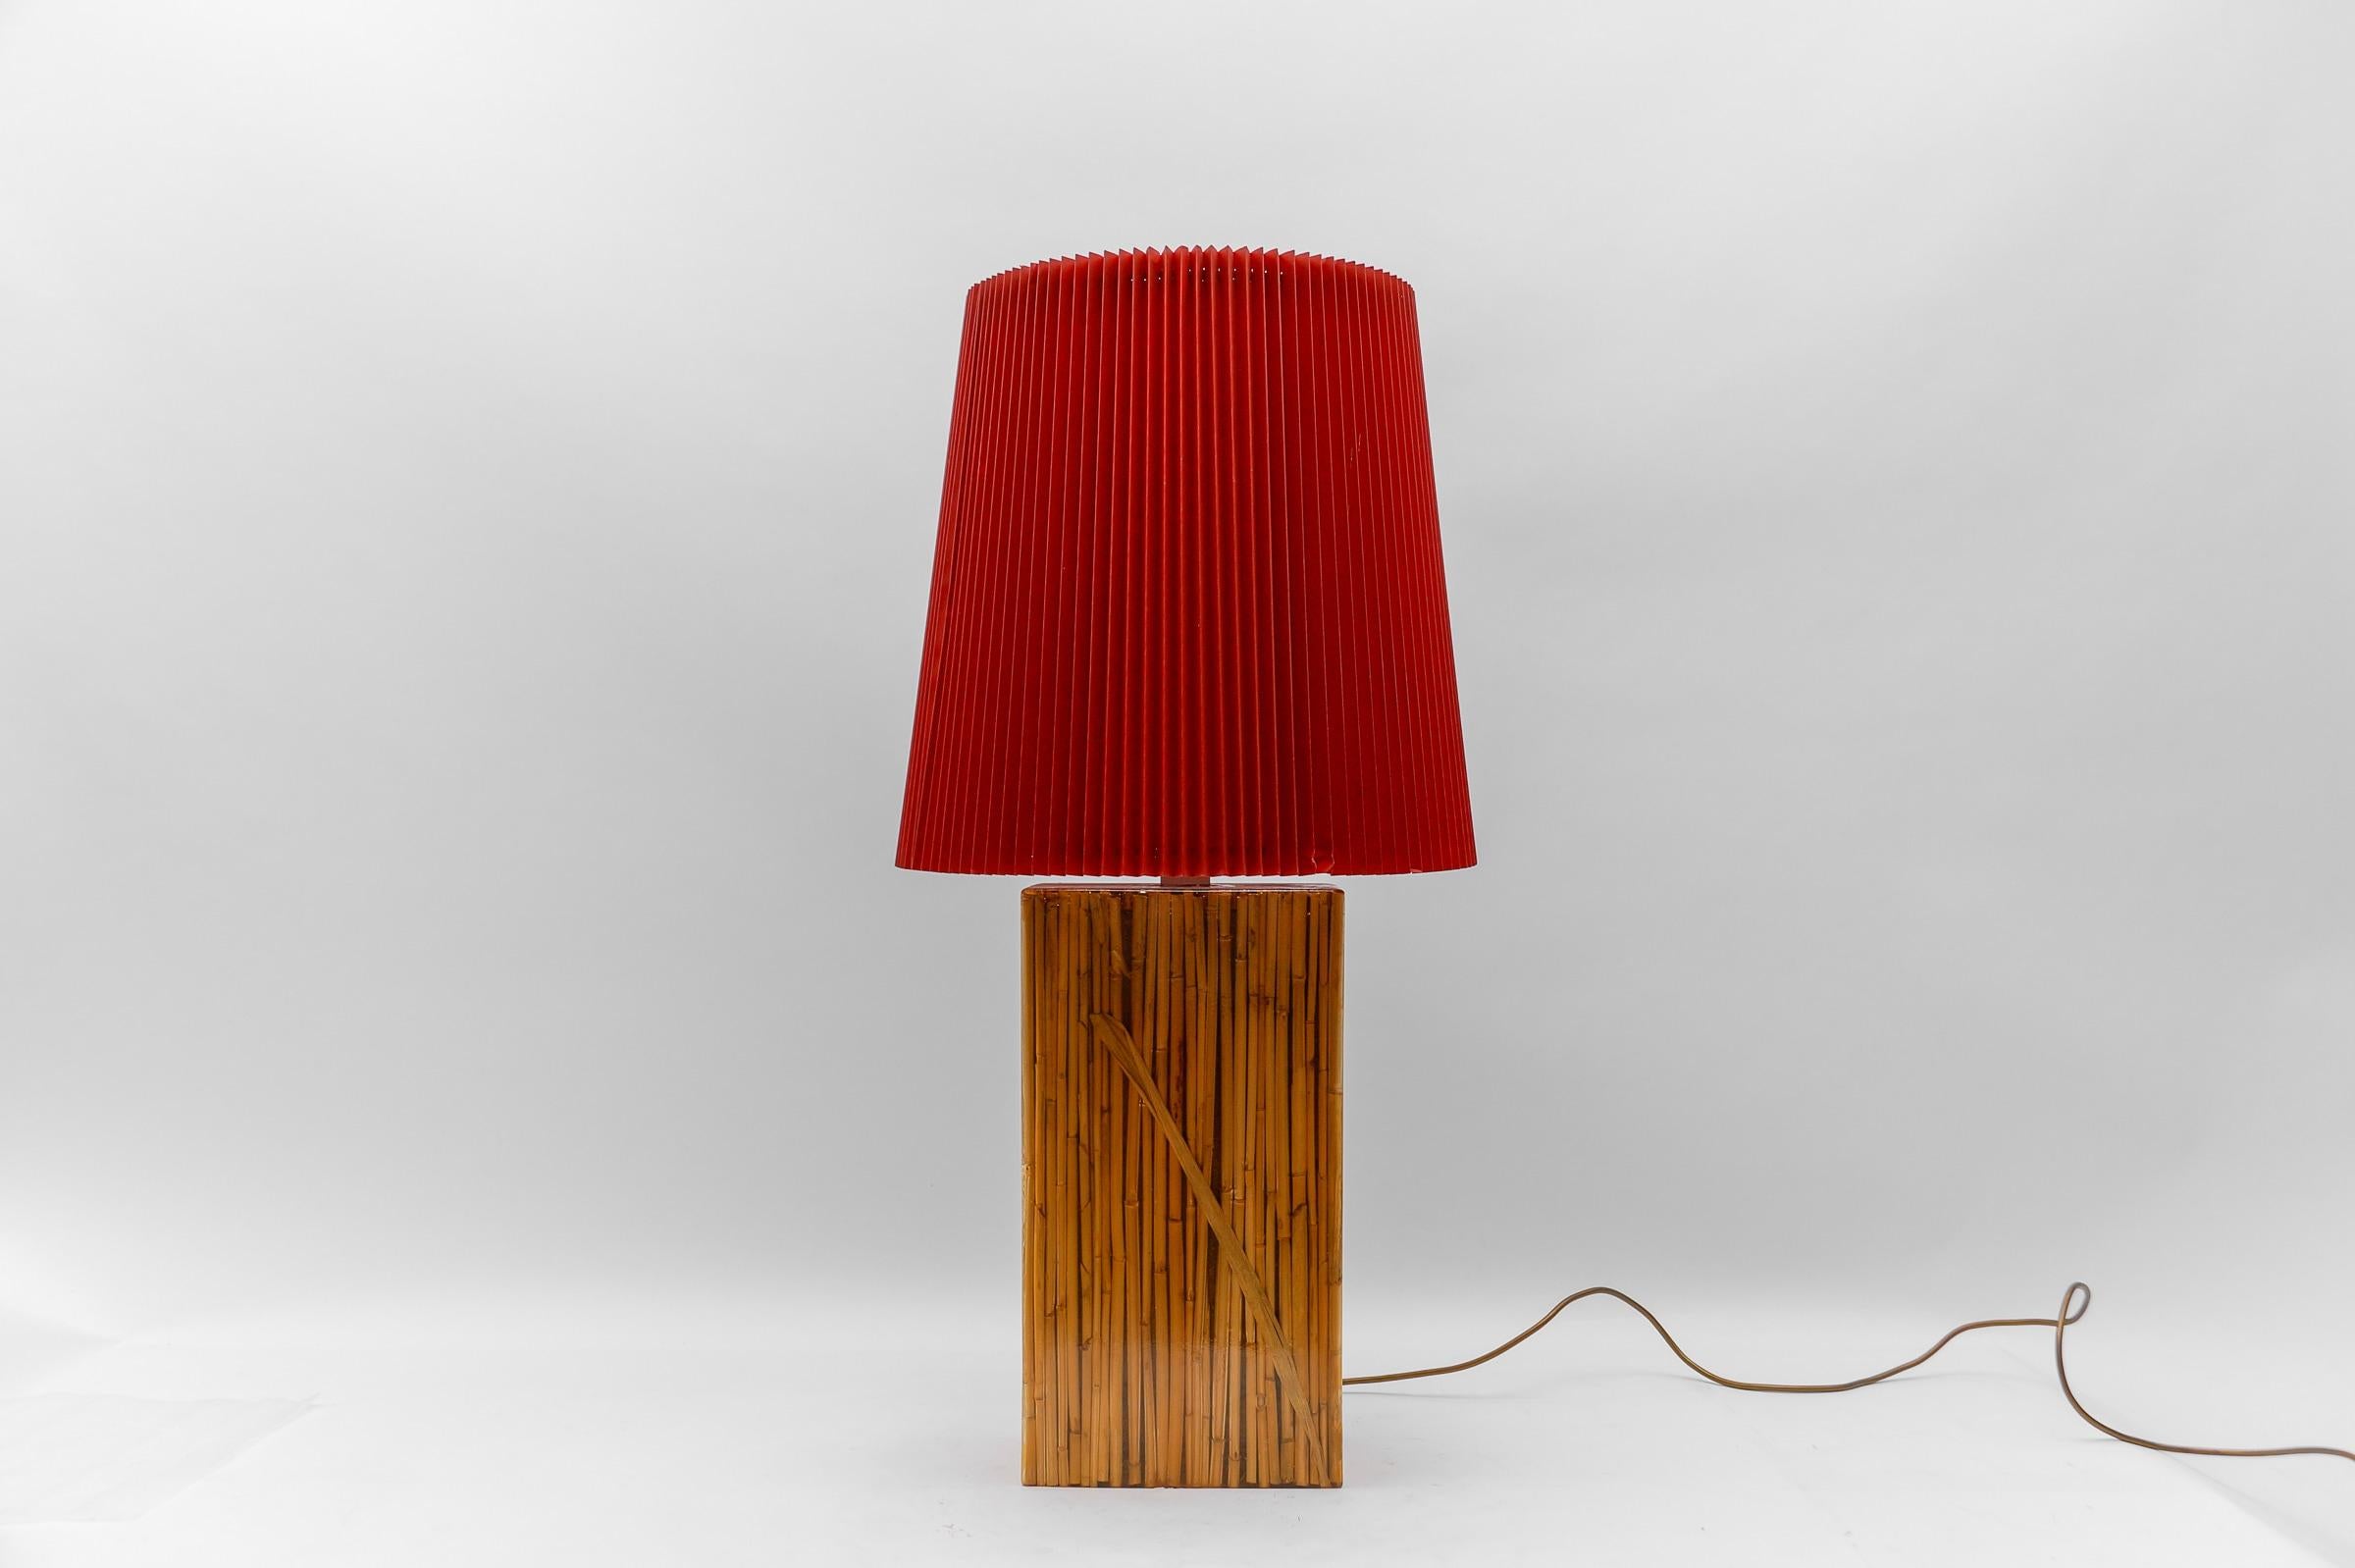 Large Riccardo Marzi Bamboo Resin Table Lamp, 1970s Italy For Sale 12